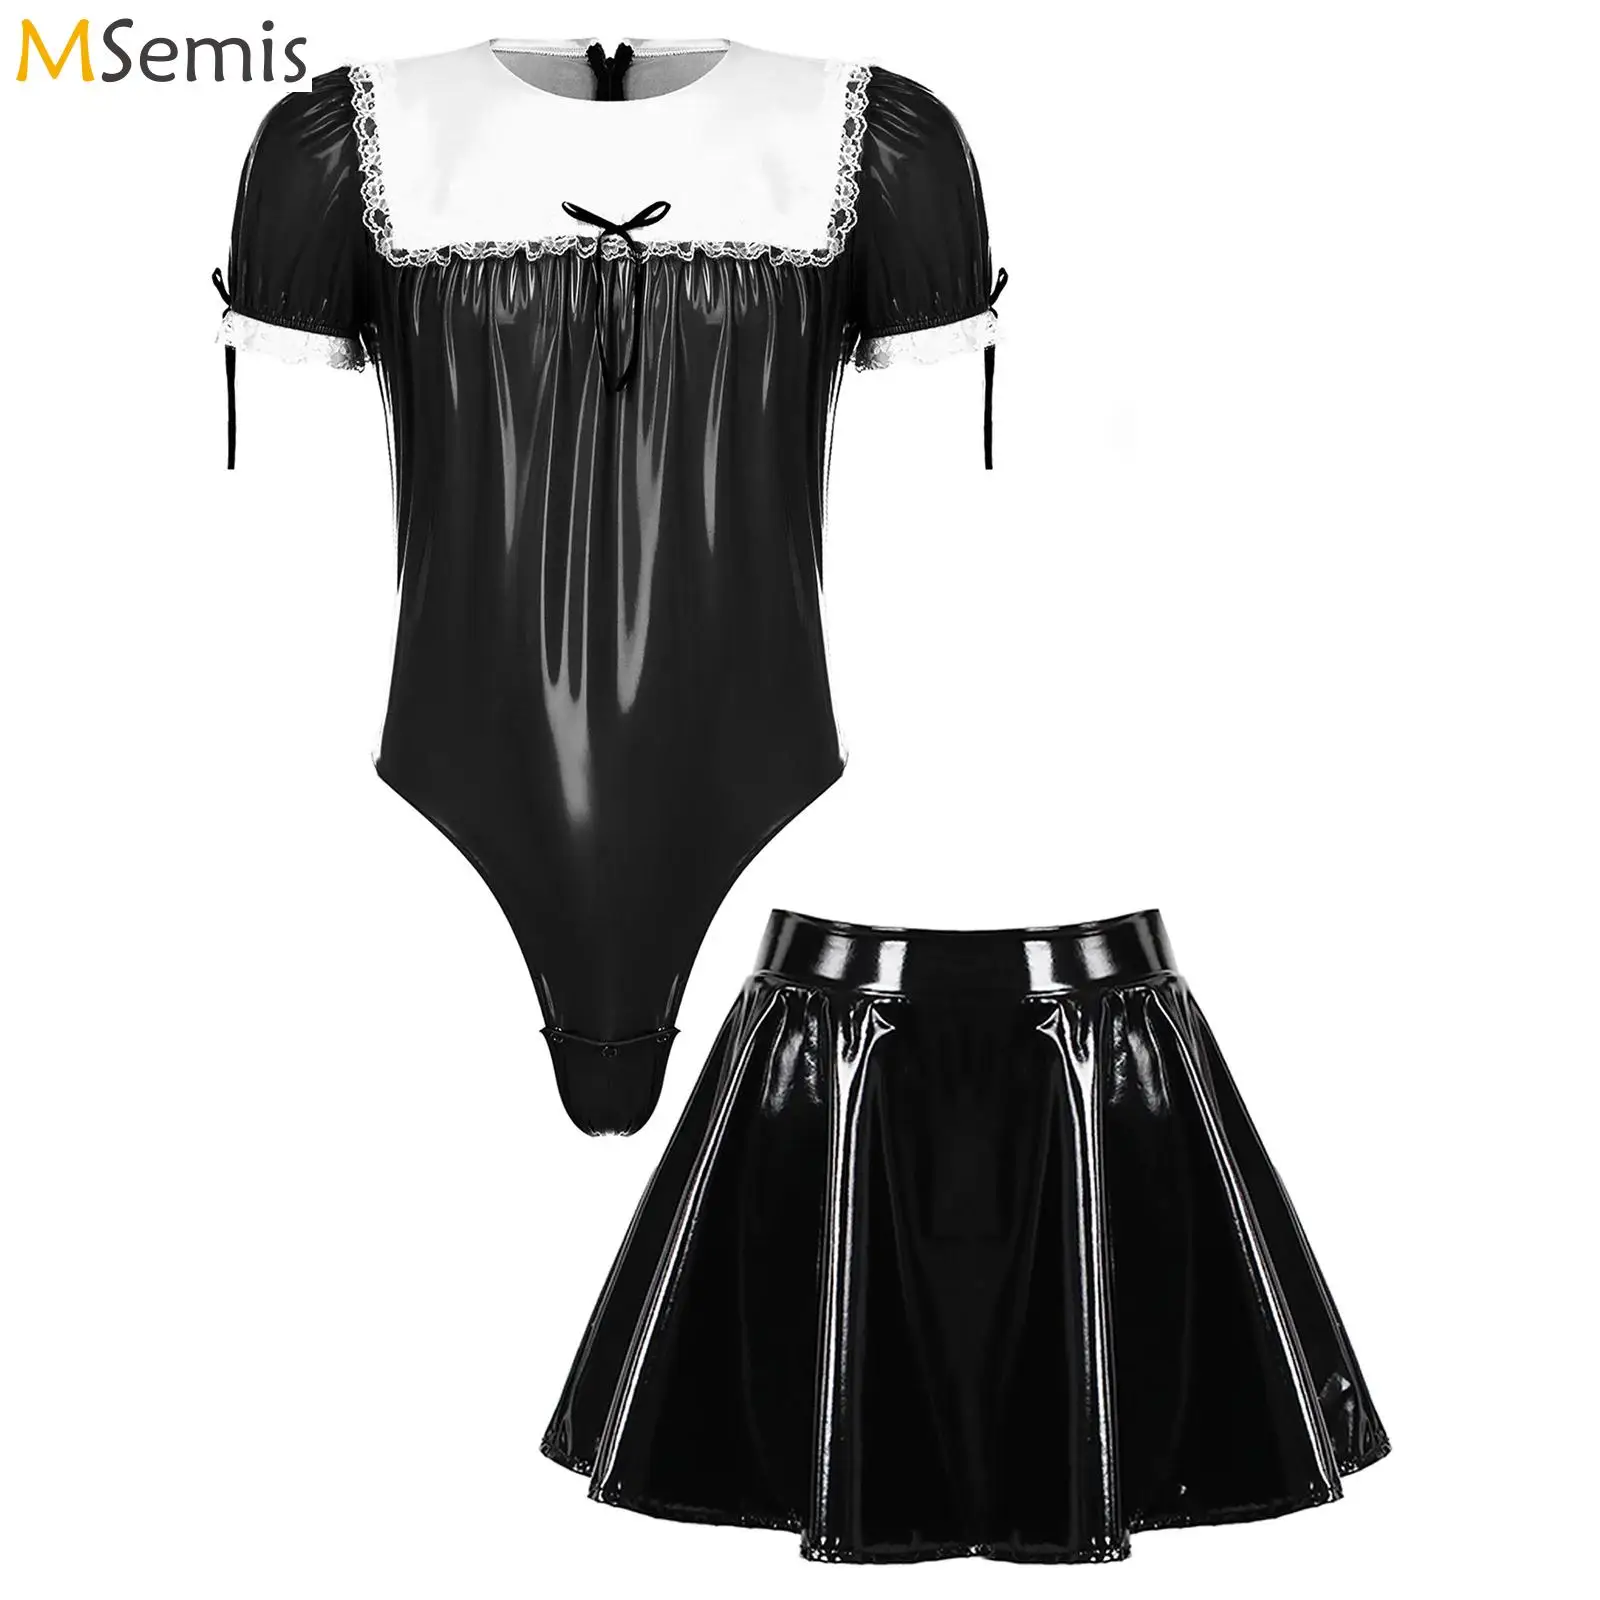 

Mens Maid Costume Wetlook Sissy Patent Leather Bodysuits Puff Sleeve Pajamas A-Line Flared Skirt Crossdressing Lingerie Outfit